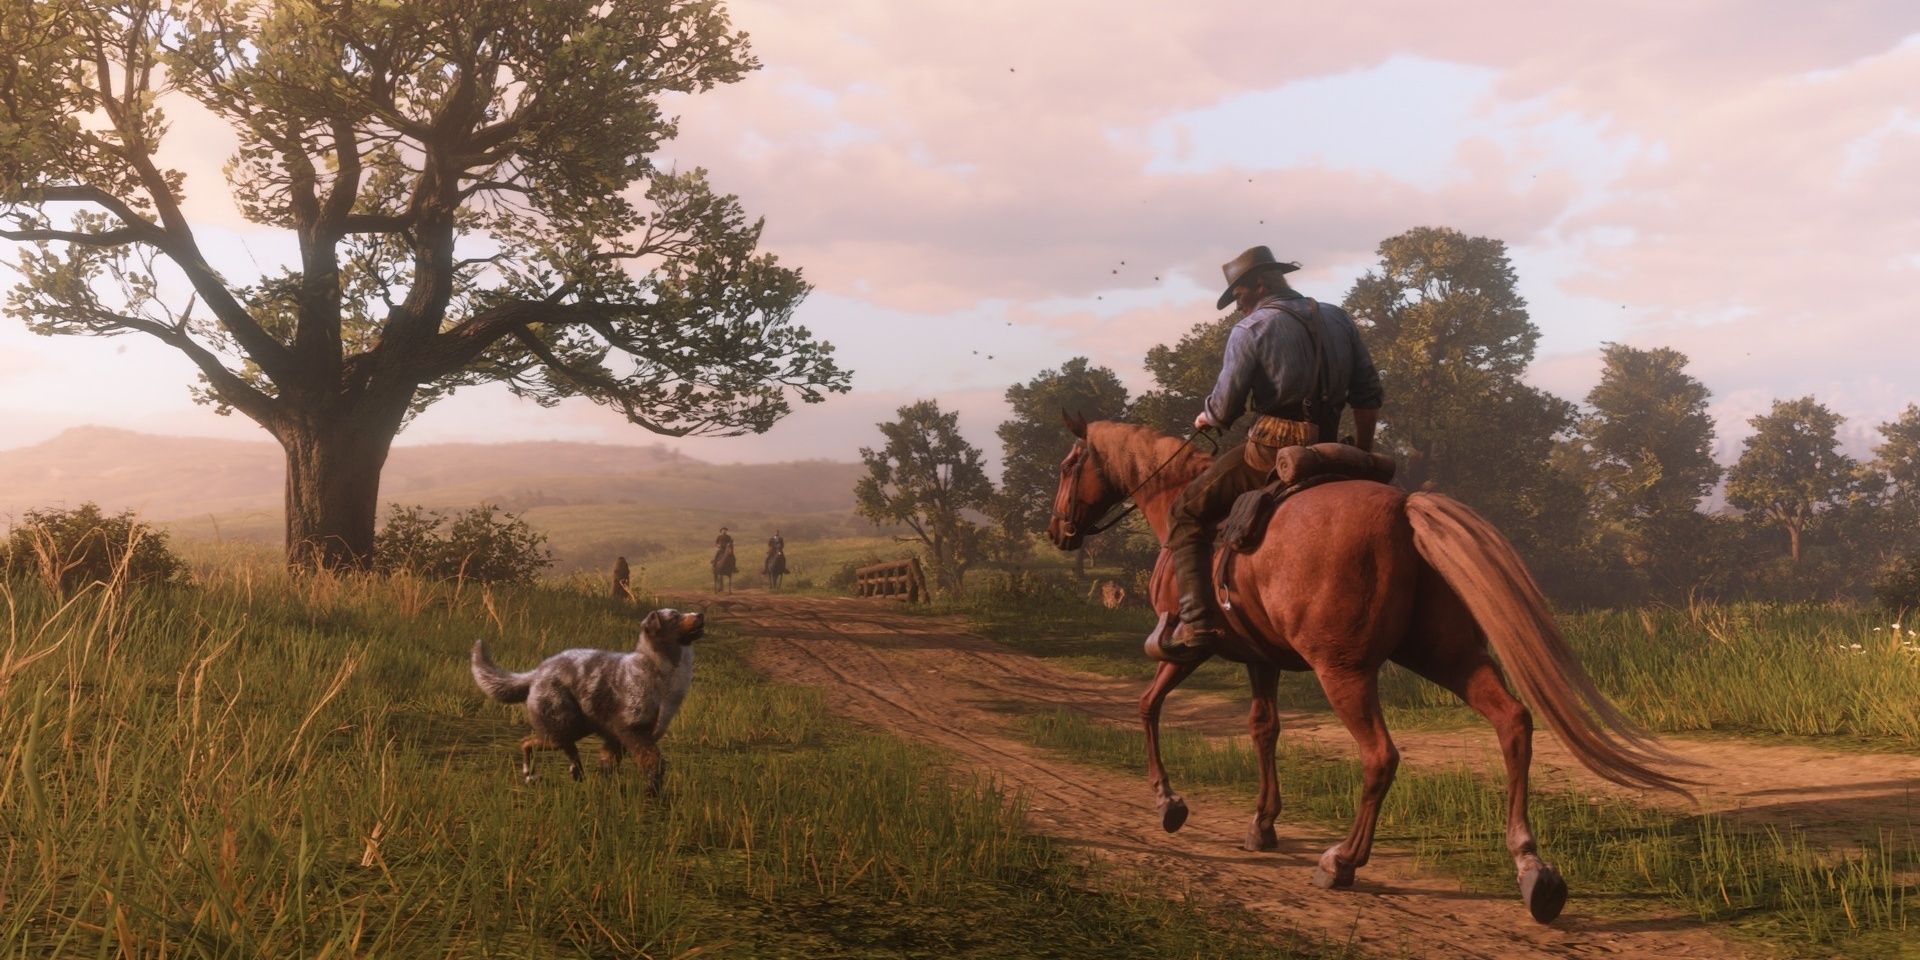 Arthur Morgan from Red Dead Redemption 2 trotting on a horse while passing by a black and white spotted dog.